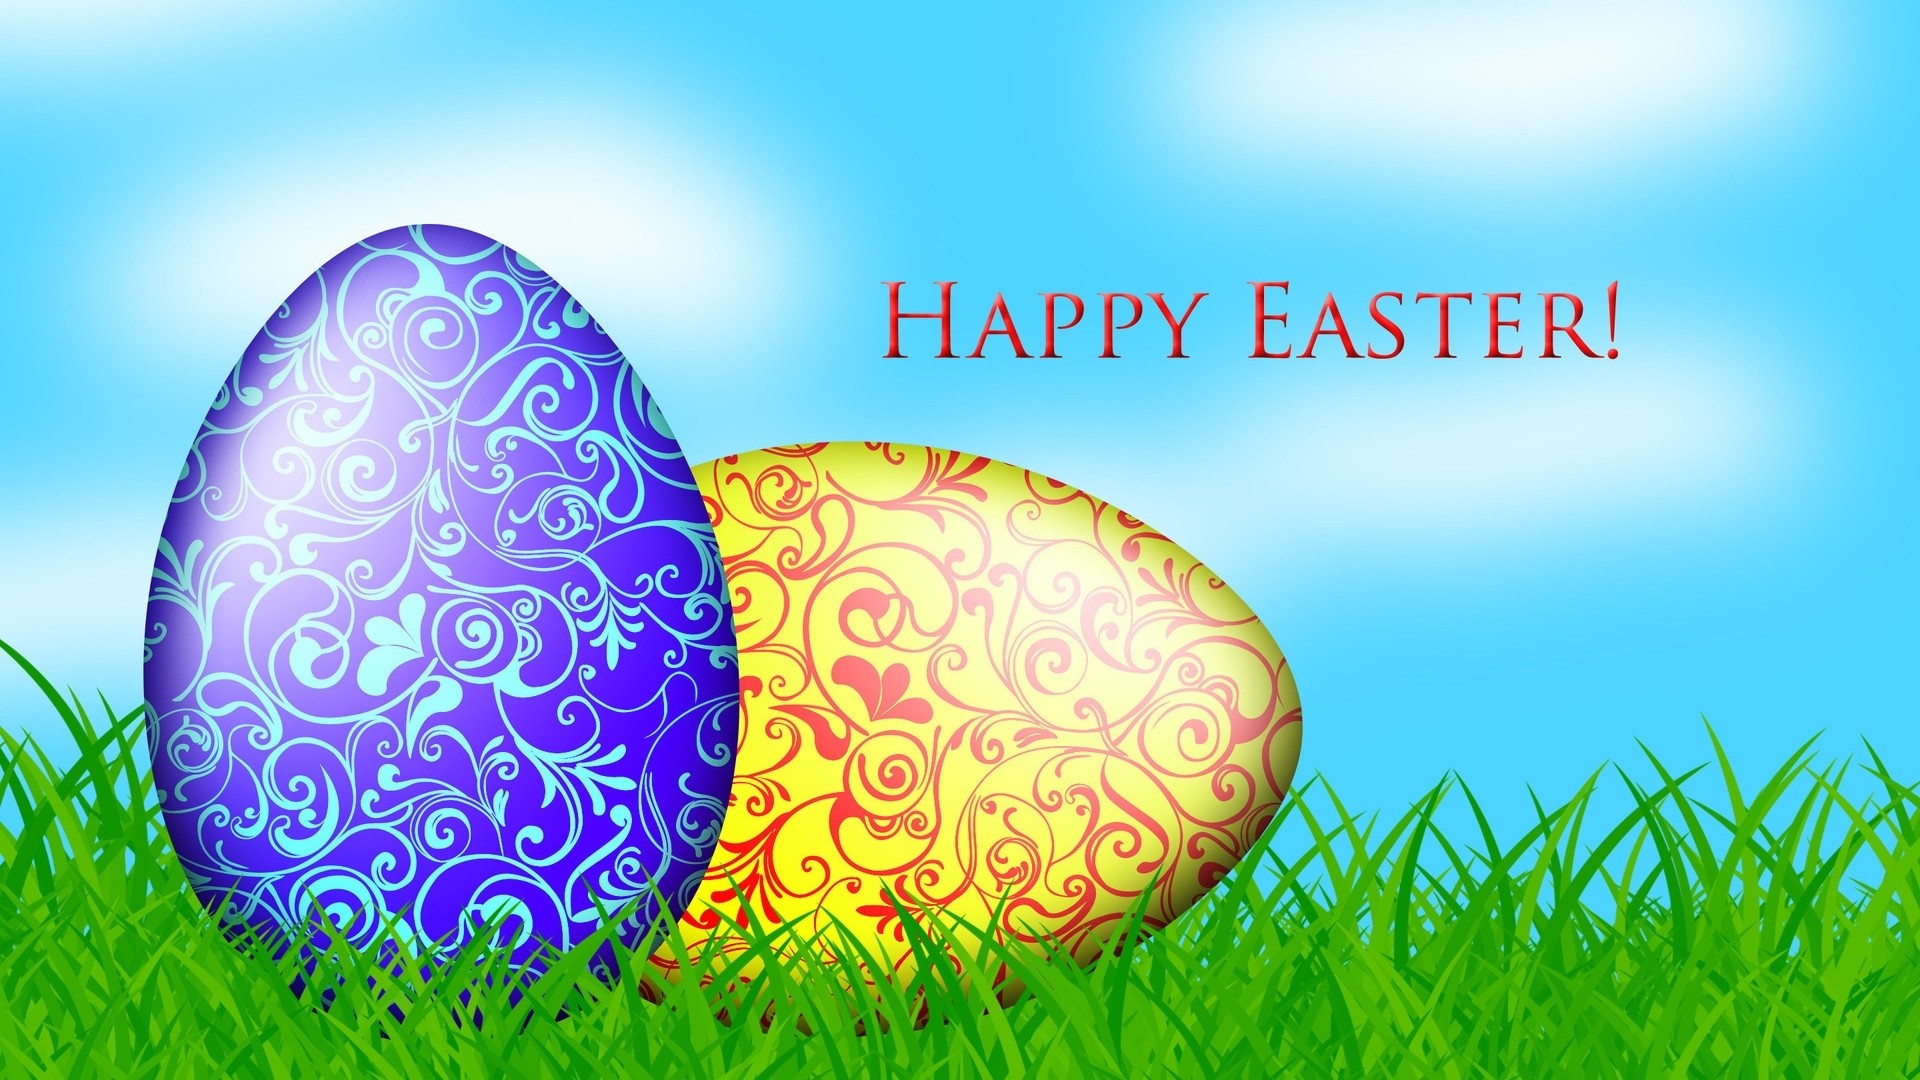 Happy Easter Image For Pc